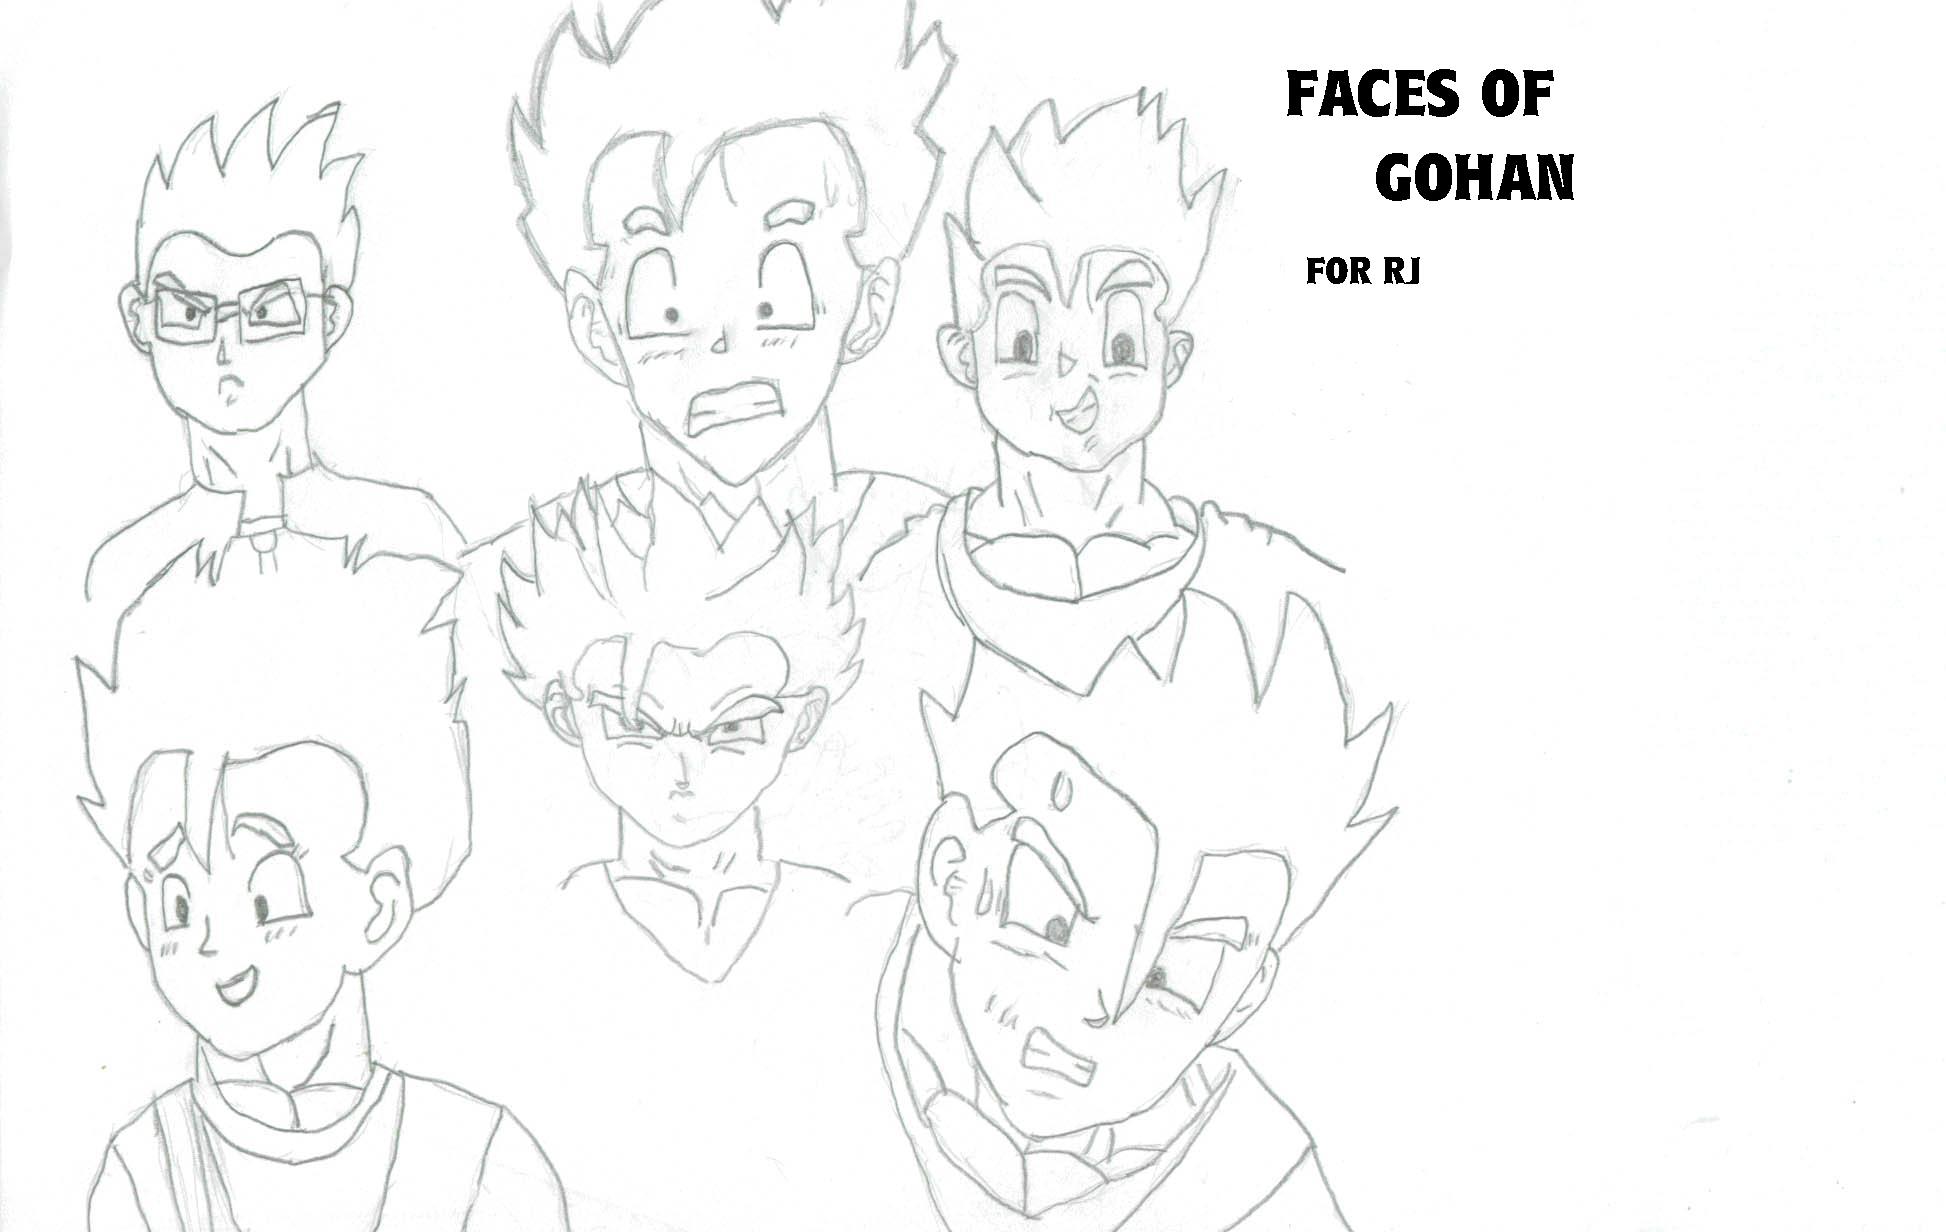 *Faces of Gohan-For RJ by SSGoshin4